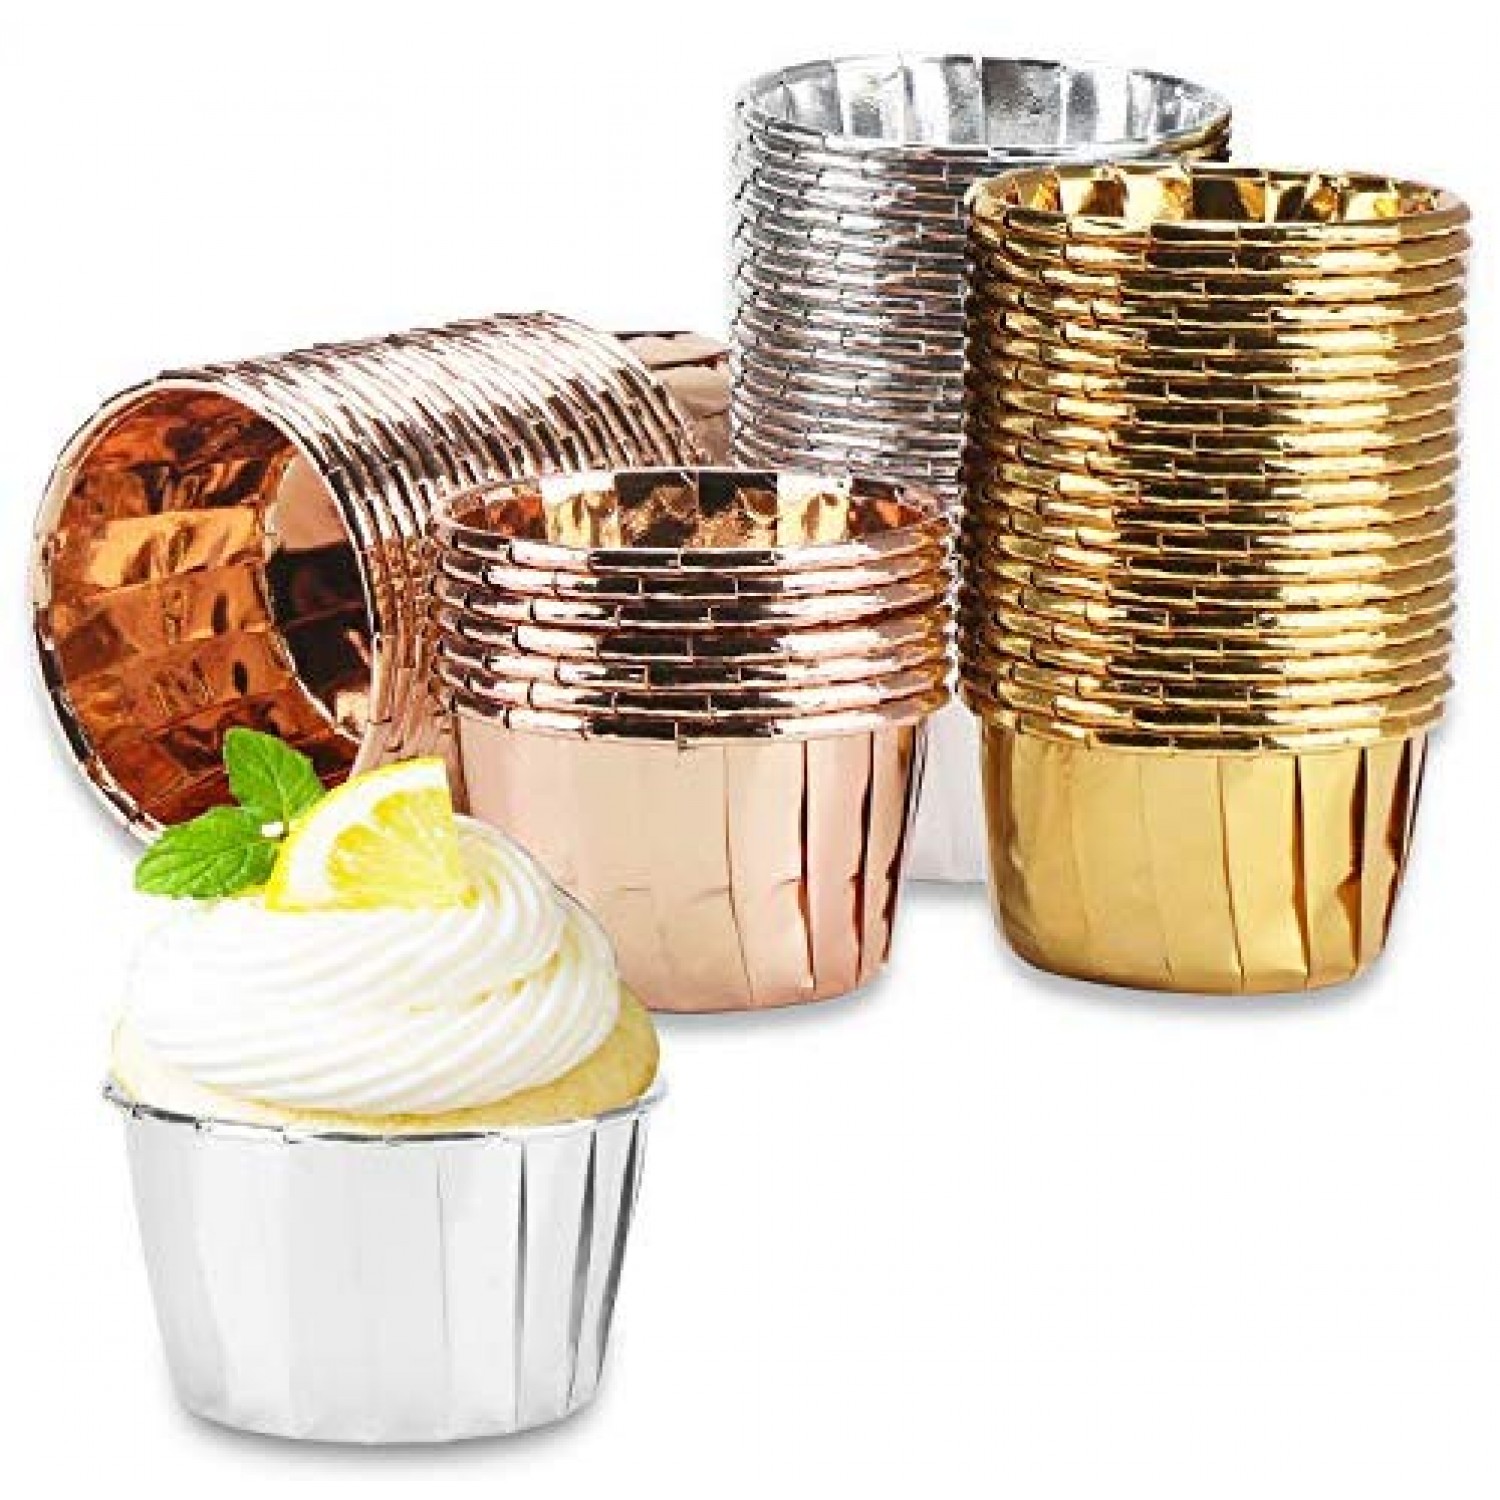 Aluminum Foil Baking Cups with Lids Cupcake Bake Utility Ramekin Clear Pudding Cups for Wedding,Christmas,Kitchen,Birthday Party,Various Holiday Parties 100pcs 5 oz Gold Dessert Baking Cups Holders 